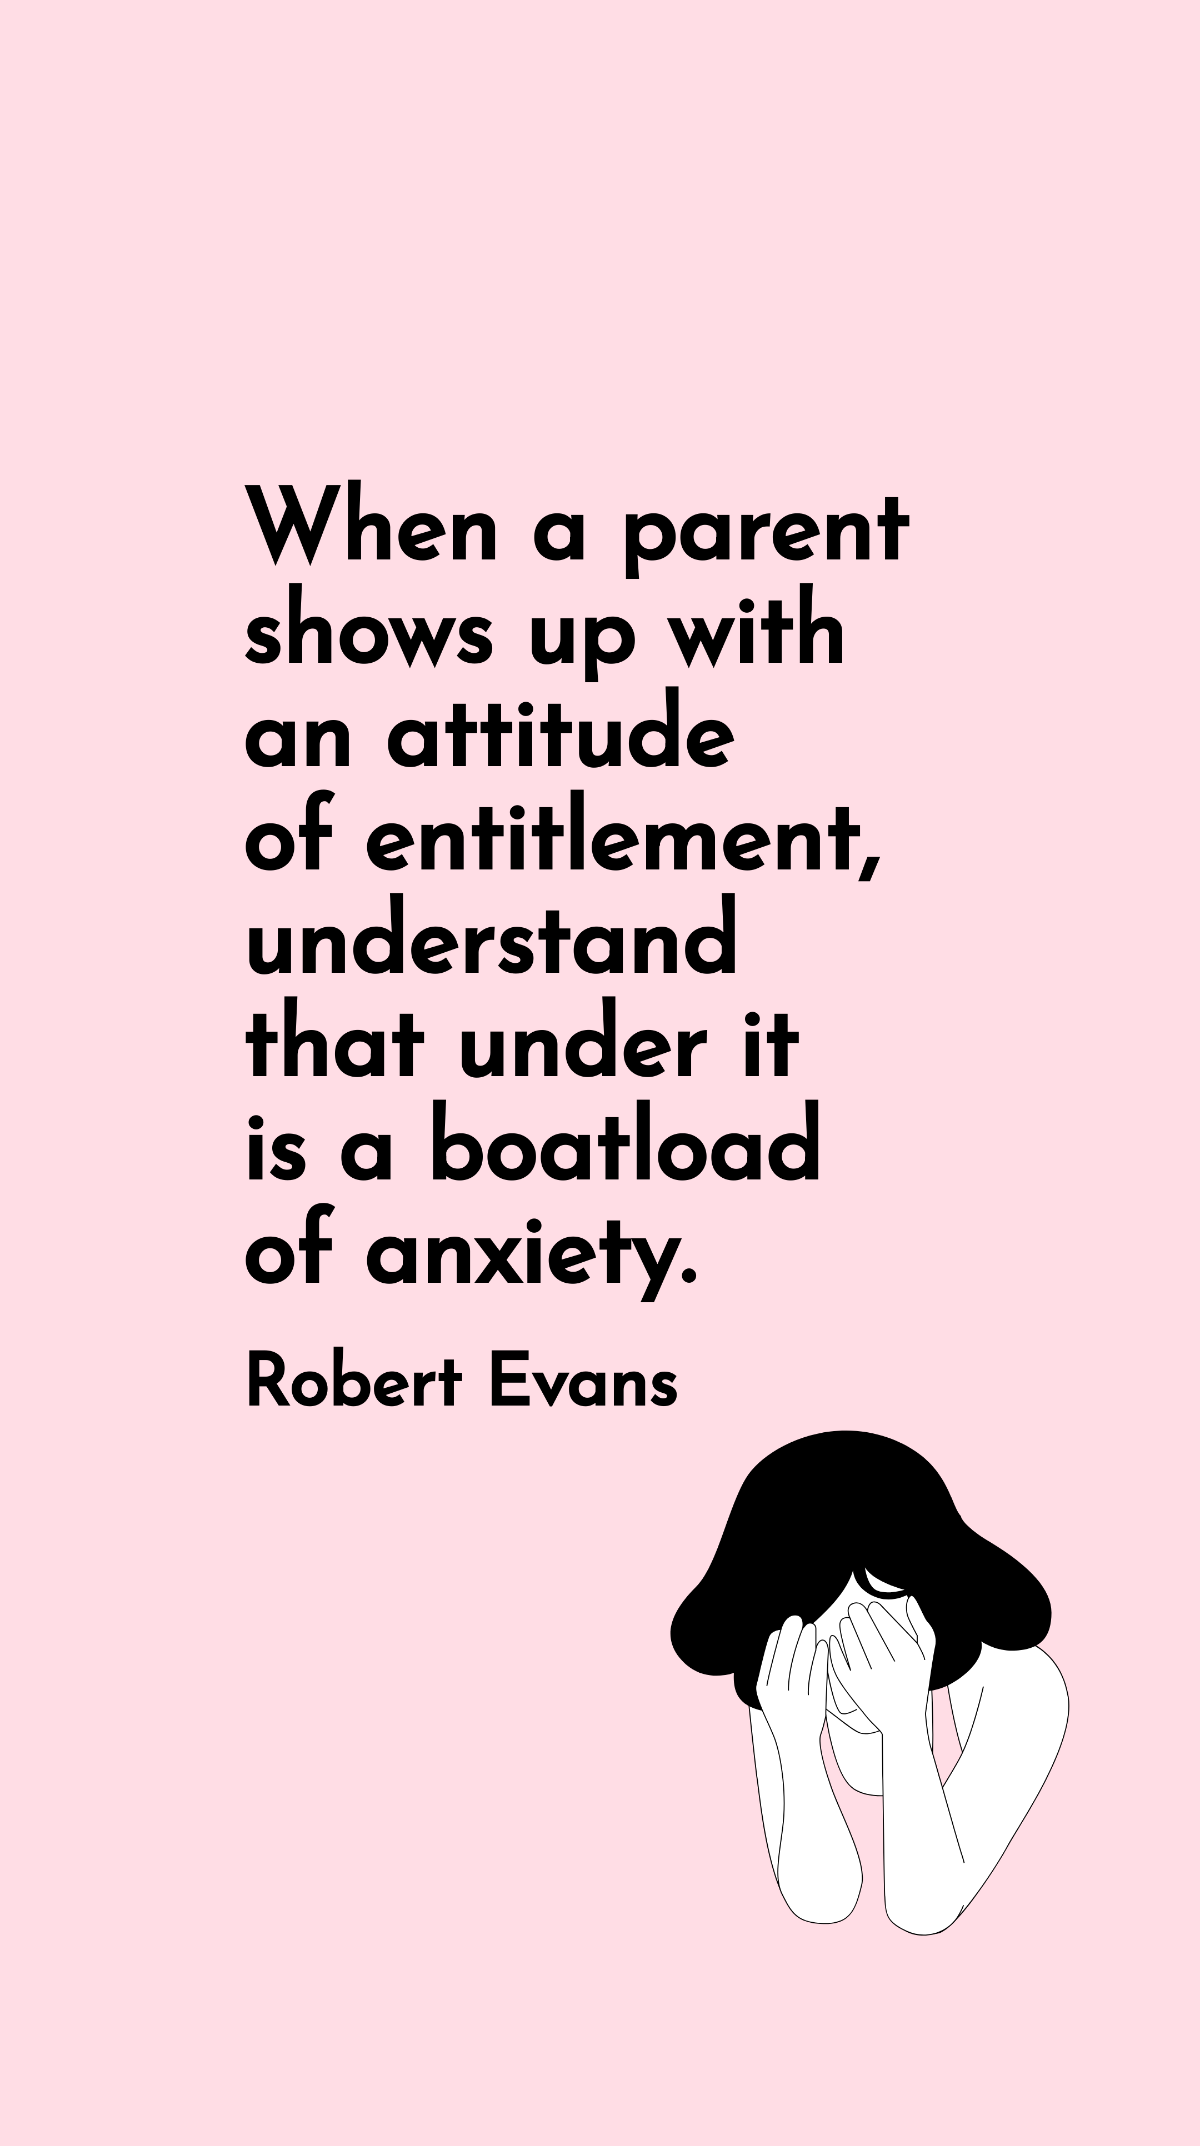 Robert Evans - When a parent shows up with an attitude of entitlement, understand that under it is a boatload of anxiety. Template